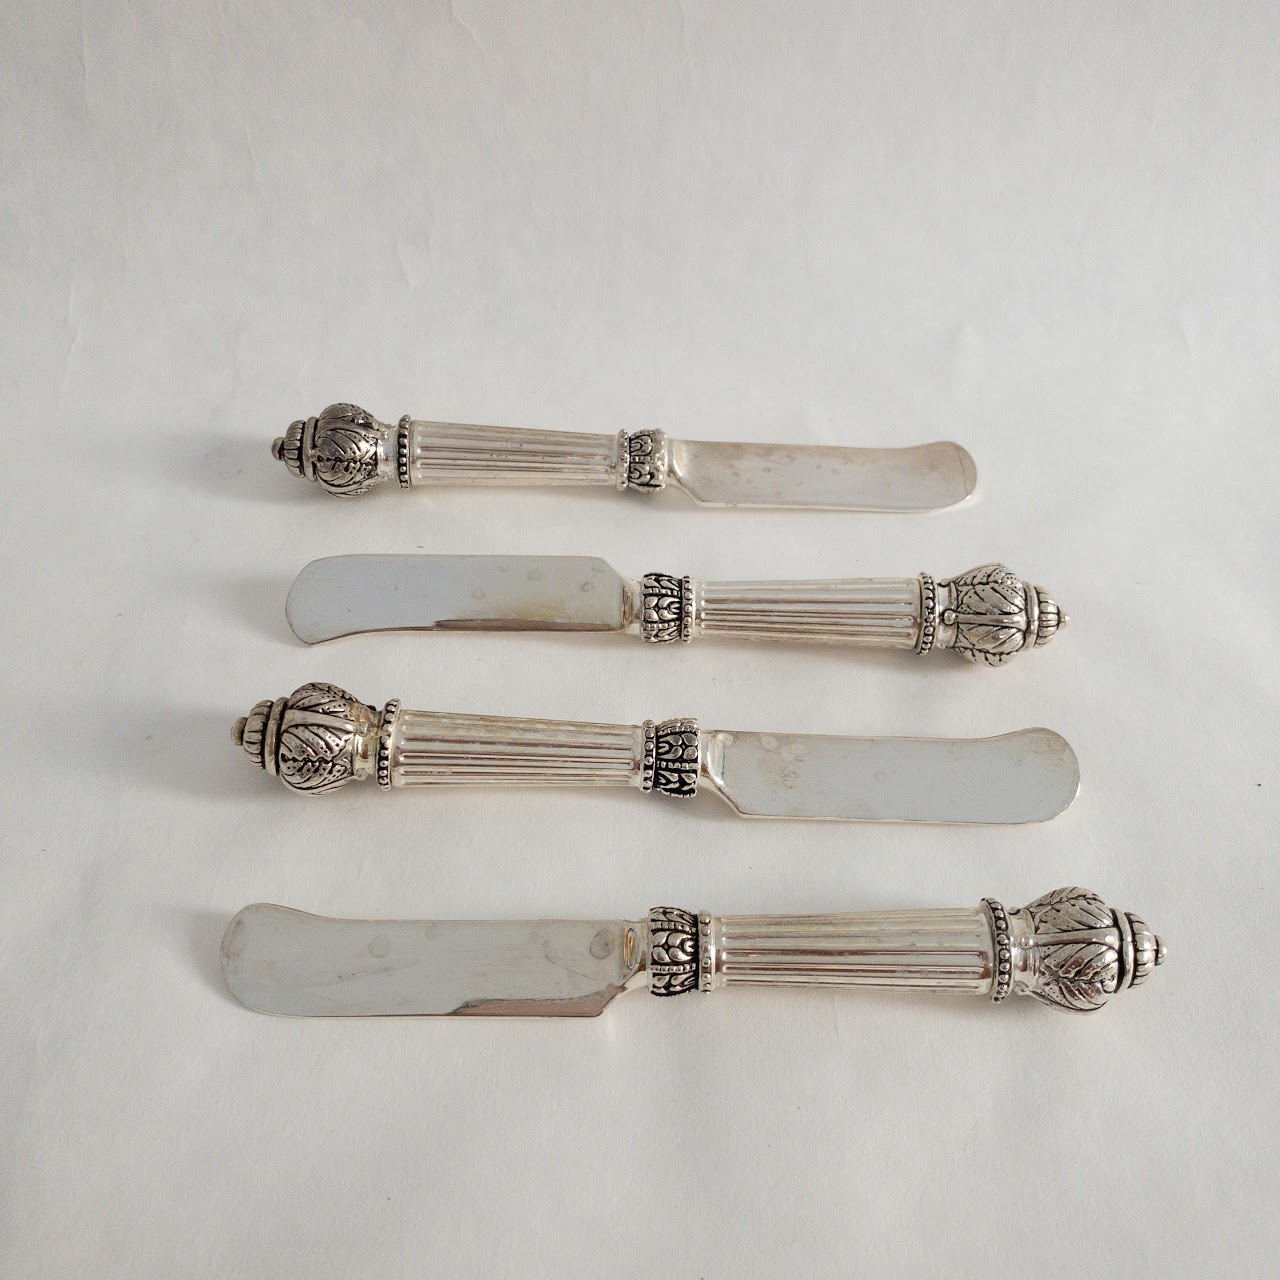 Silver-Plated Decorative Butter Knife Set